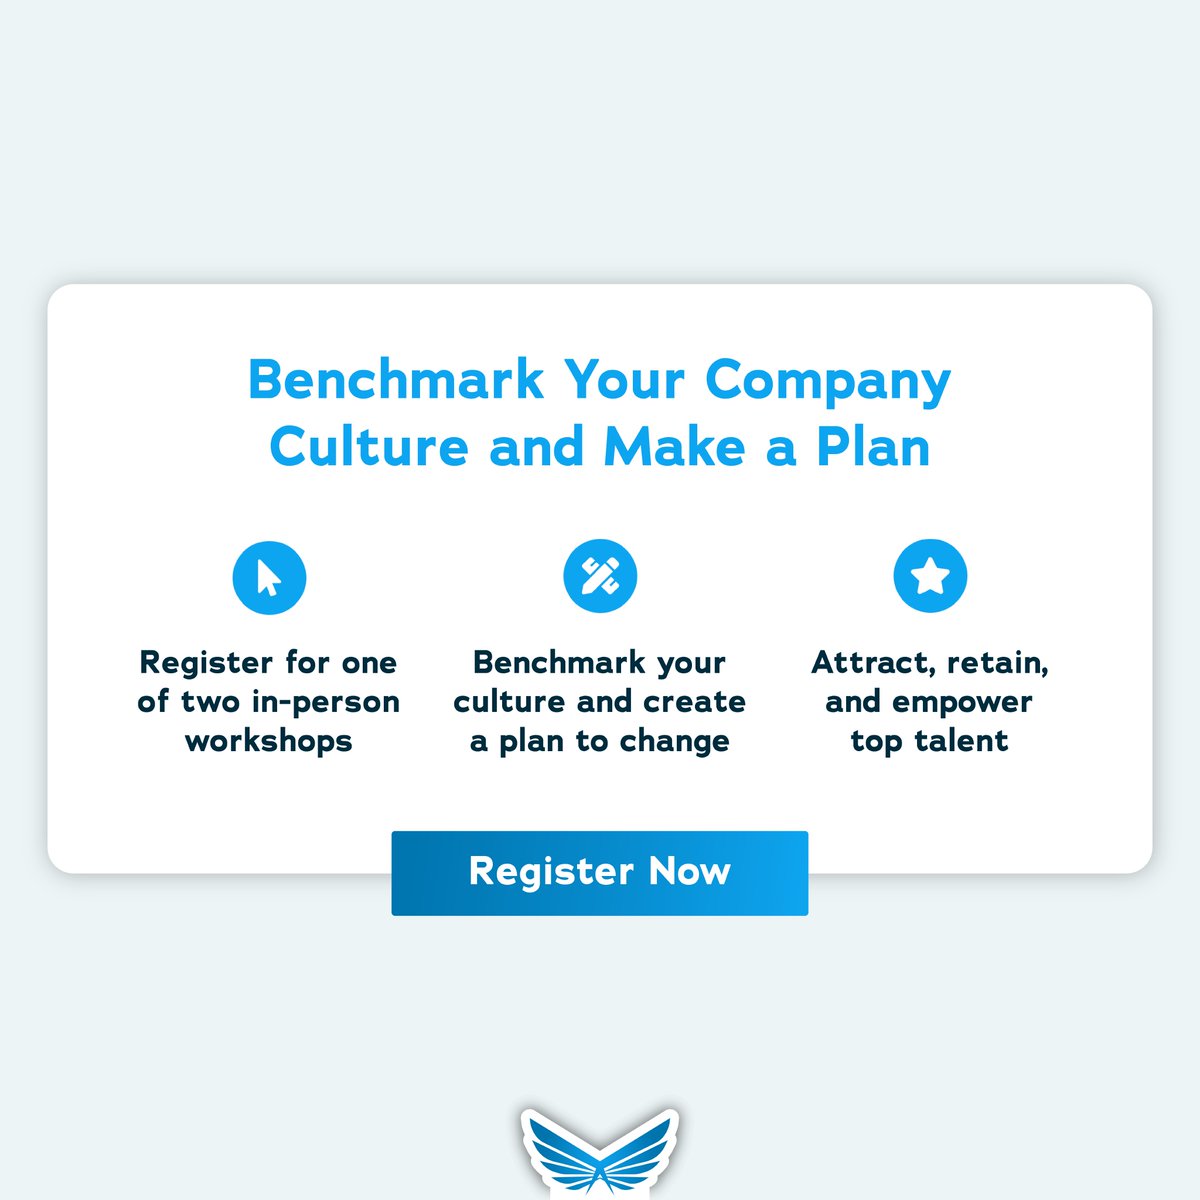 Benchmark your company culture and make a plan. Register for one of our two in-person worships and learn how to attract, retain, and empower top talent. 💸

Register now: hubs.ly/Q01xmNH20

#workshhop #aviation #aviationprofessionals #aviationpros #aviationevent